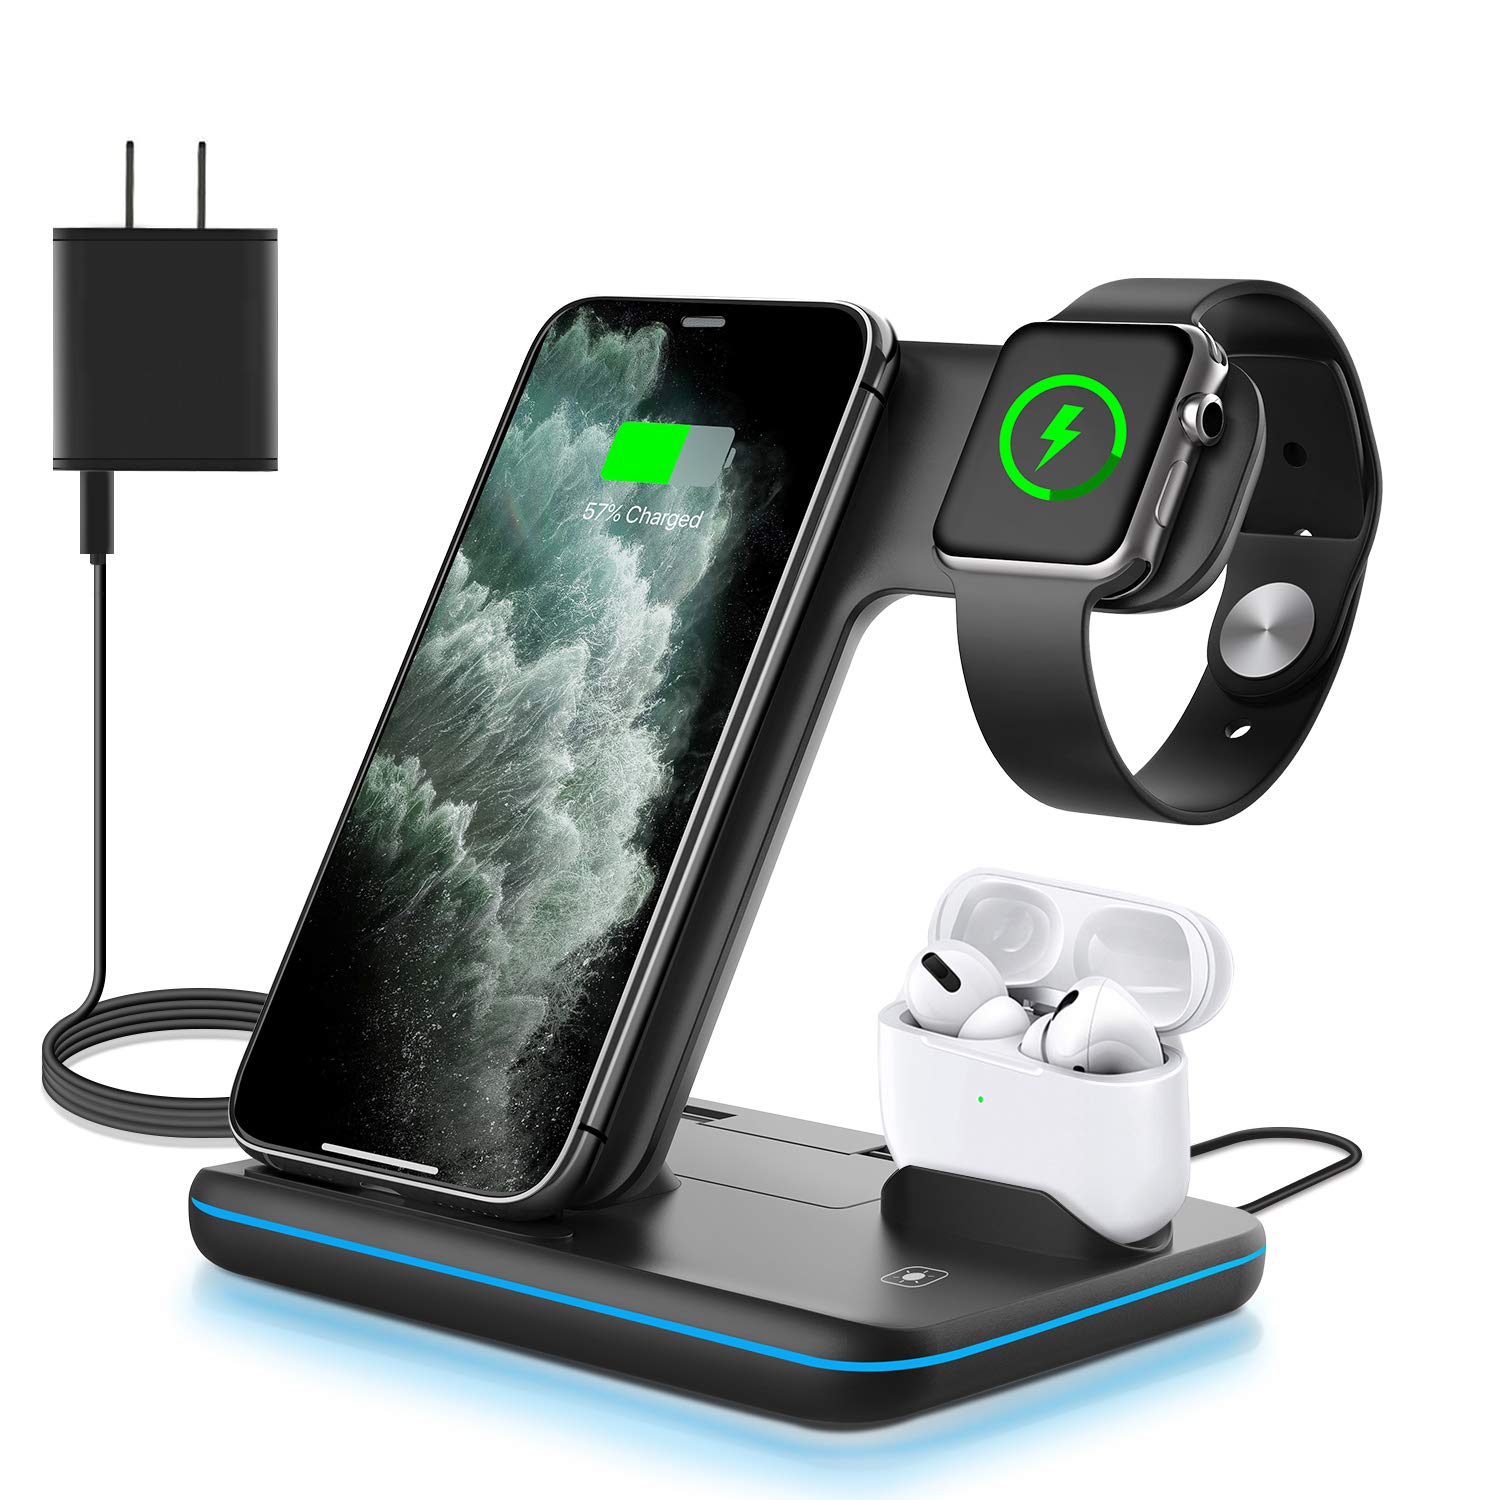 Mua WAITIEE Wireless Charger 3 in 1, 15W Fast Charging Station for Apple  iWatch 6/5/4/3/2/1,AirPods Pro,for iPhone14/13 Pro/Pro  Max/12/11/X/Xr/Xs/8/Samsung Galaxy Phone Series (No Watch Charging Cable)  trên Amazon Mỹ chính hãng 2023 |